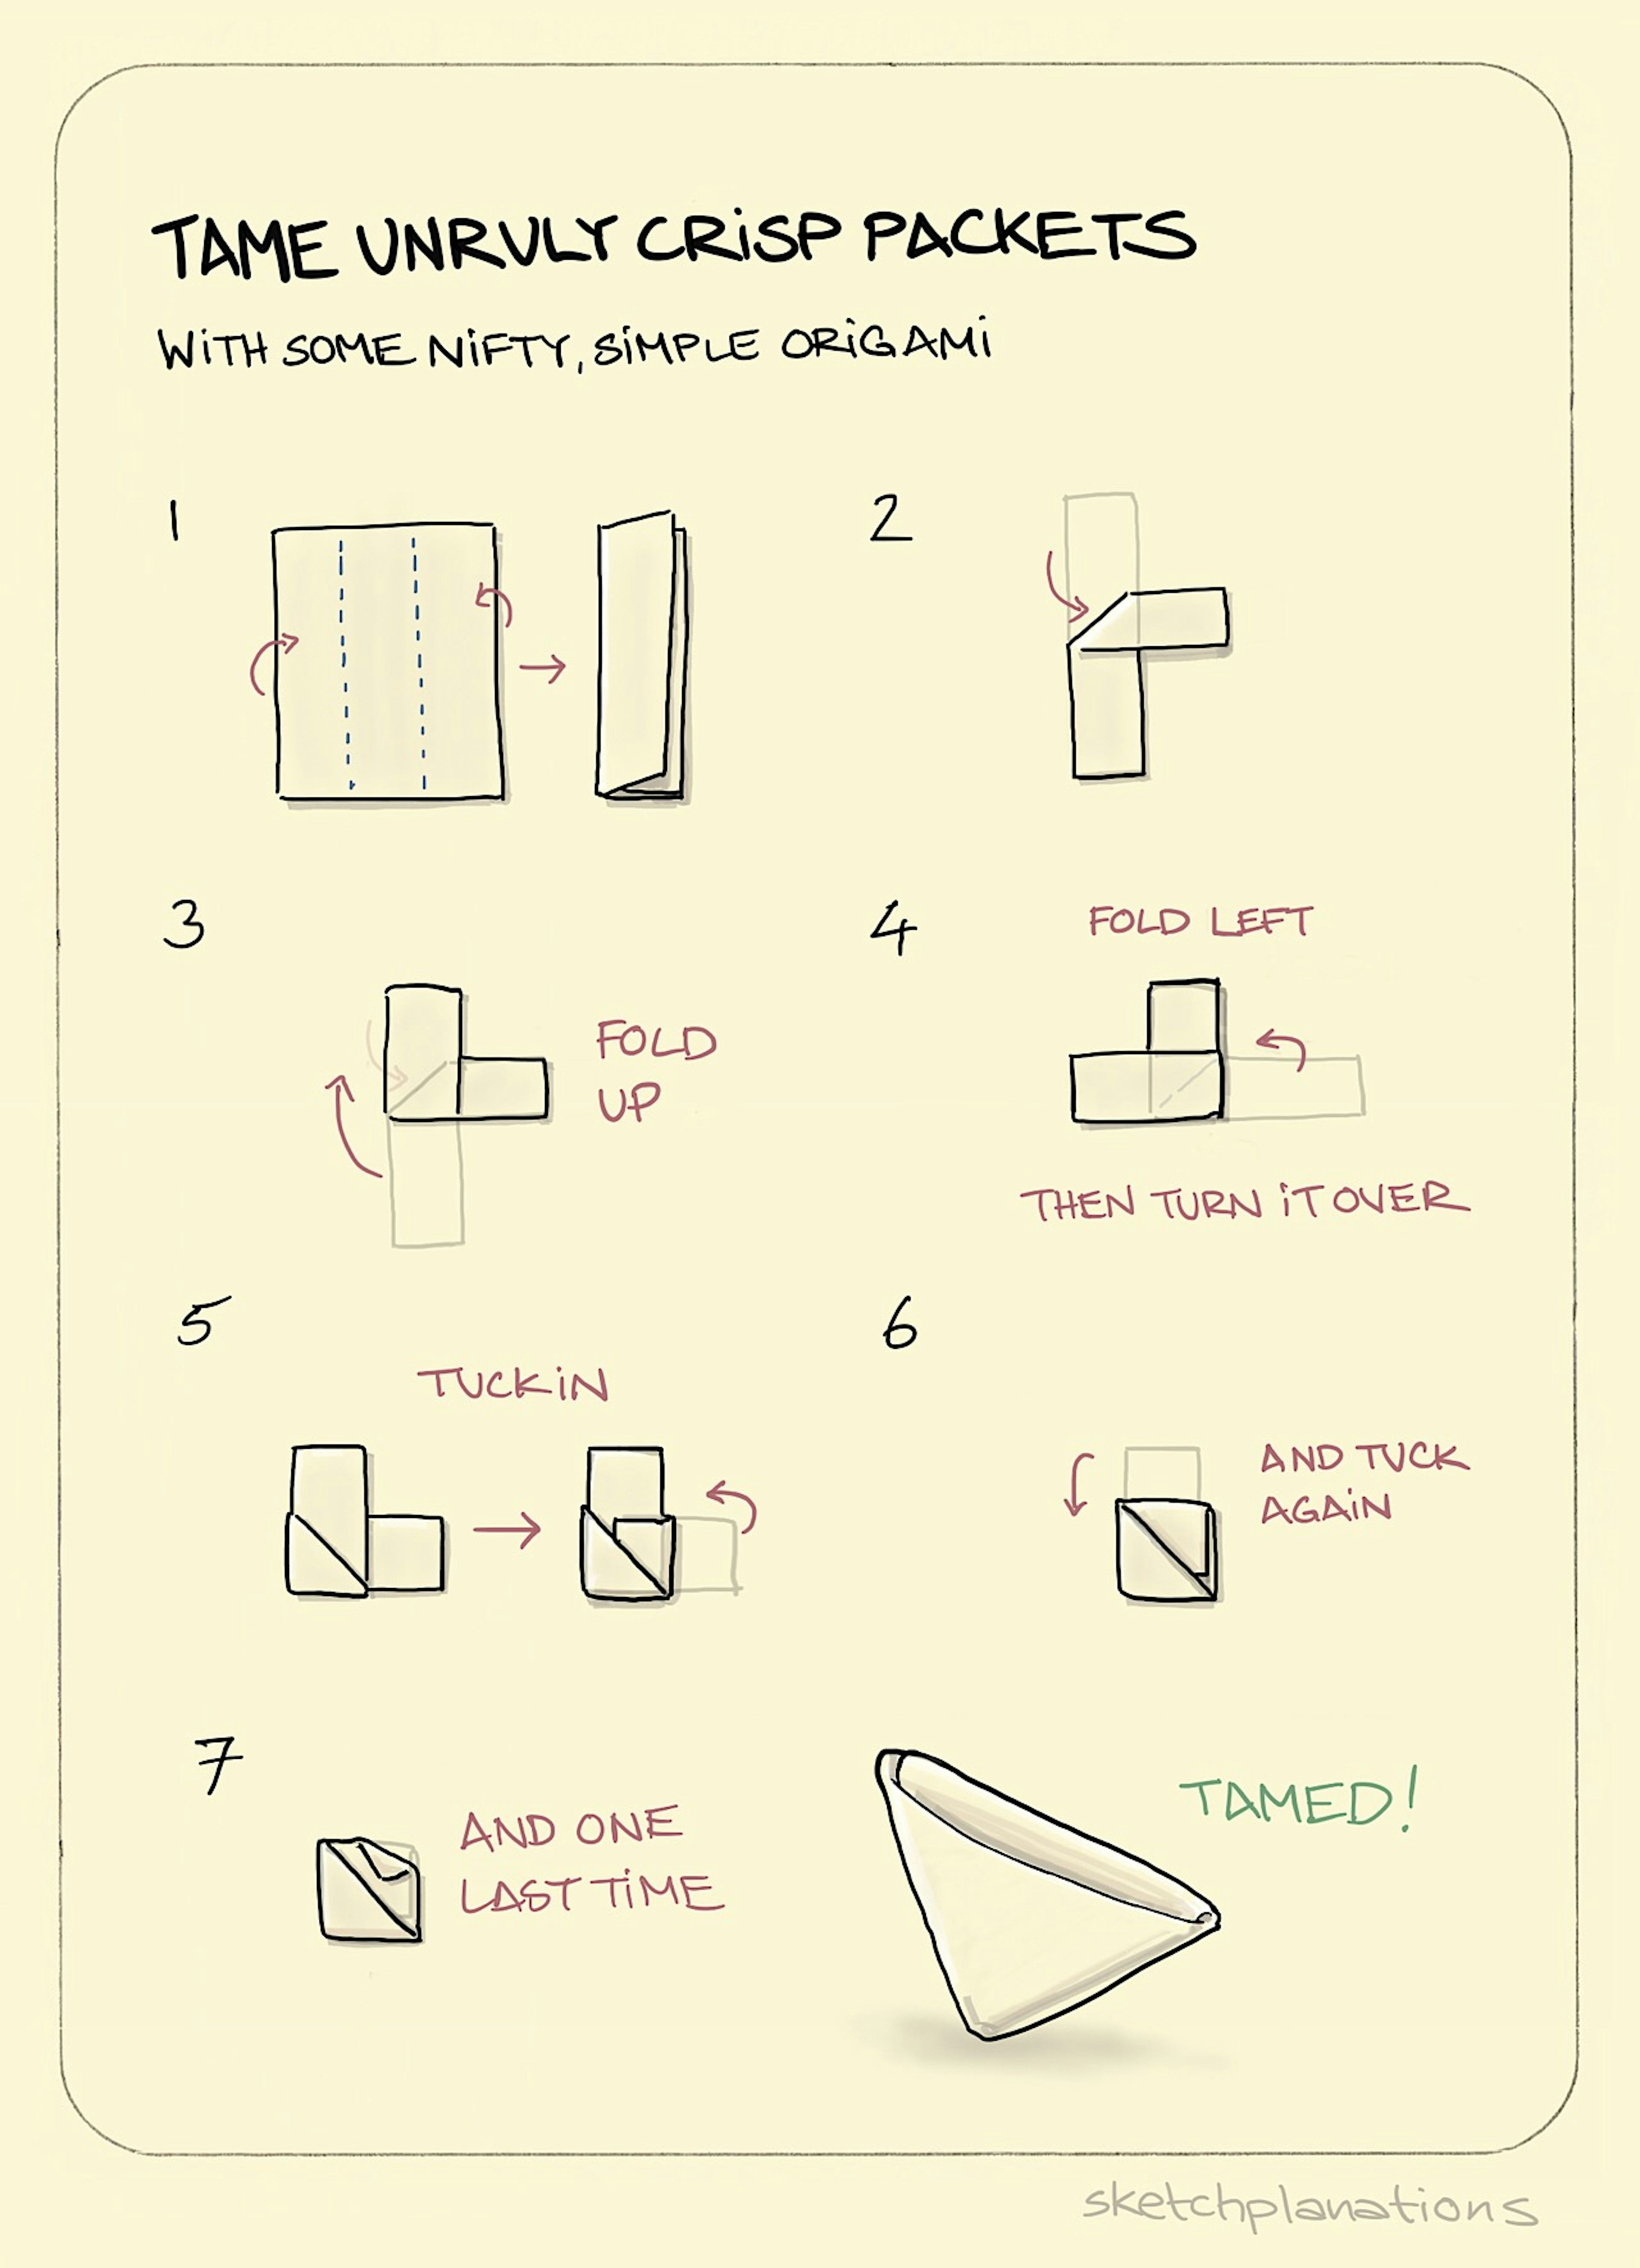 Tame unruly crisp packets illustration: a 7-step process lays out exactly how to fold a large, unruly, empty crisp packet into a neat, manageable triangle. Origami with purpose. 